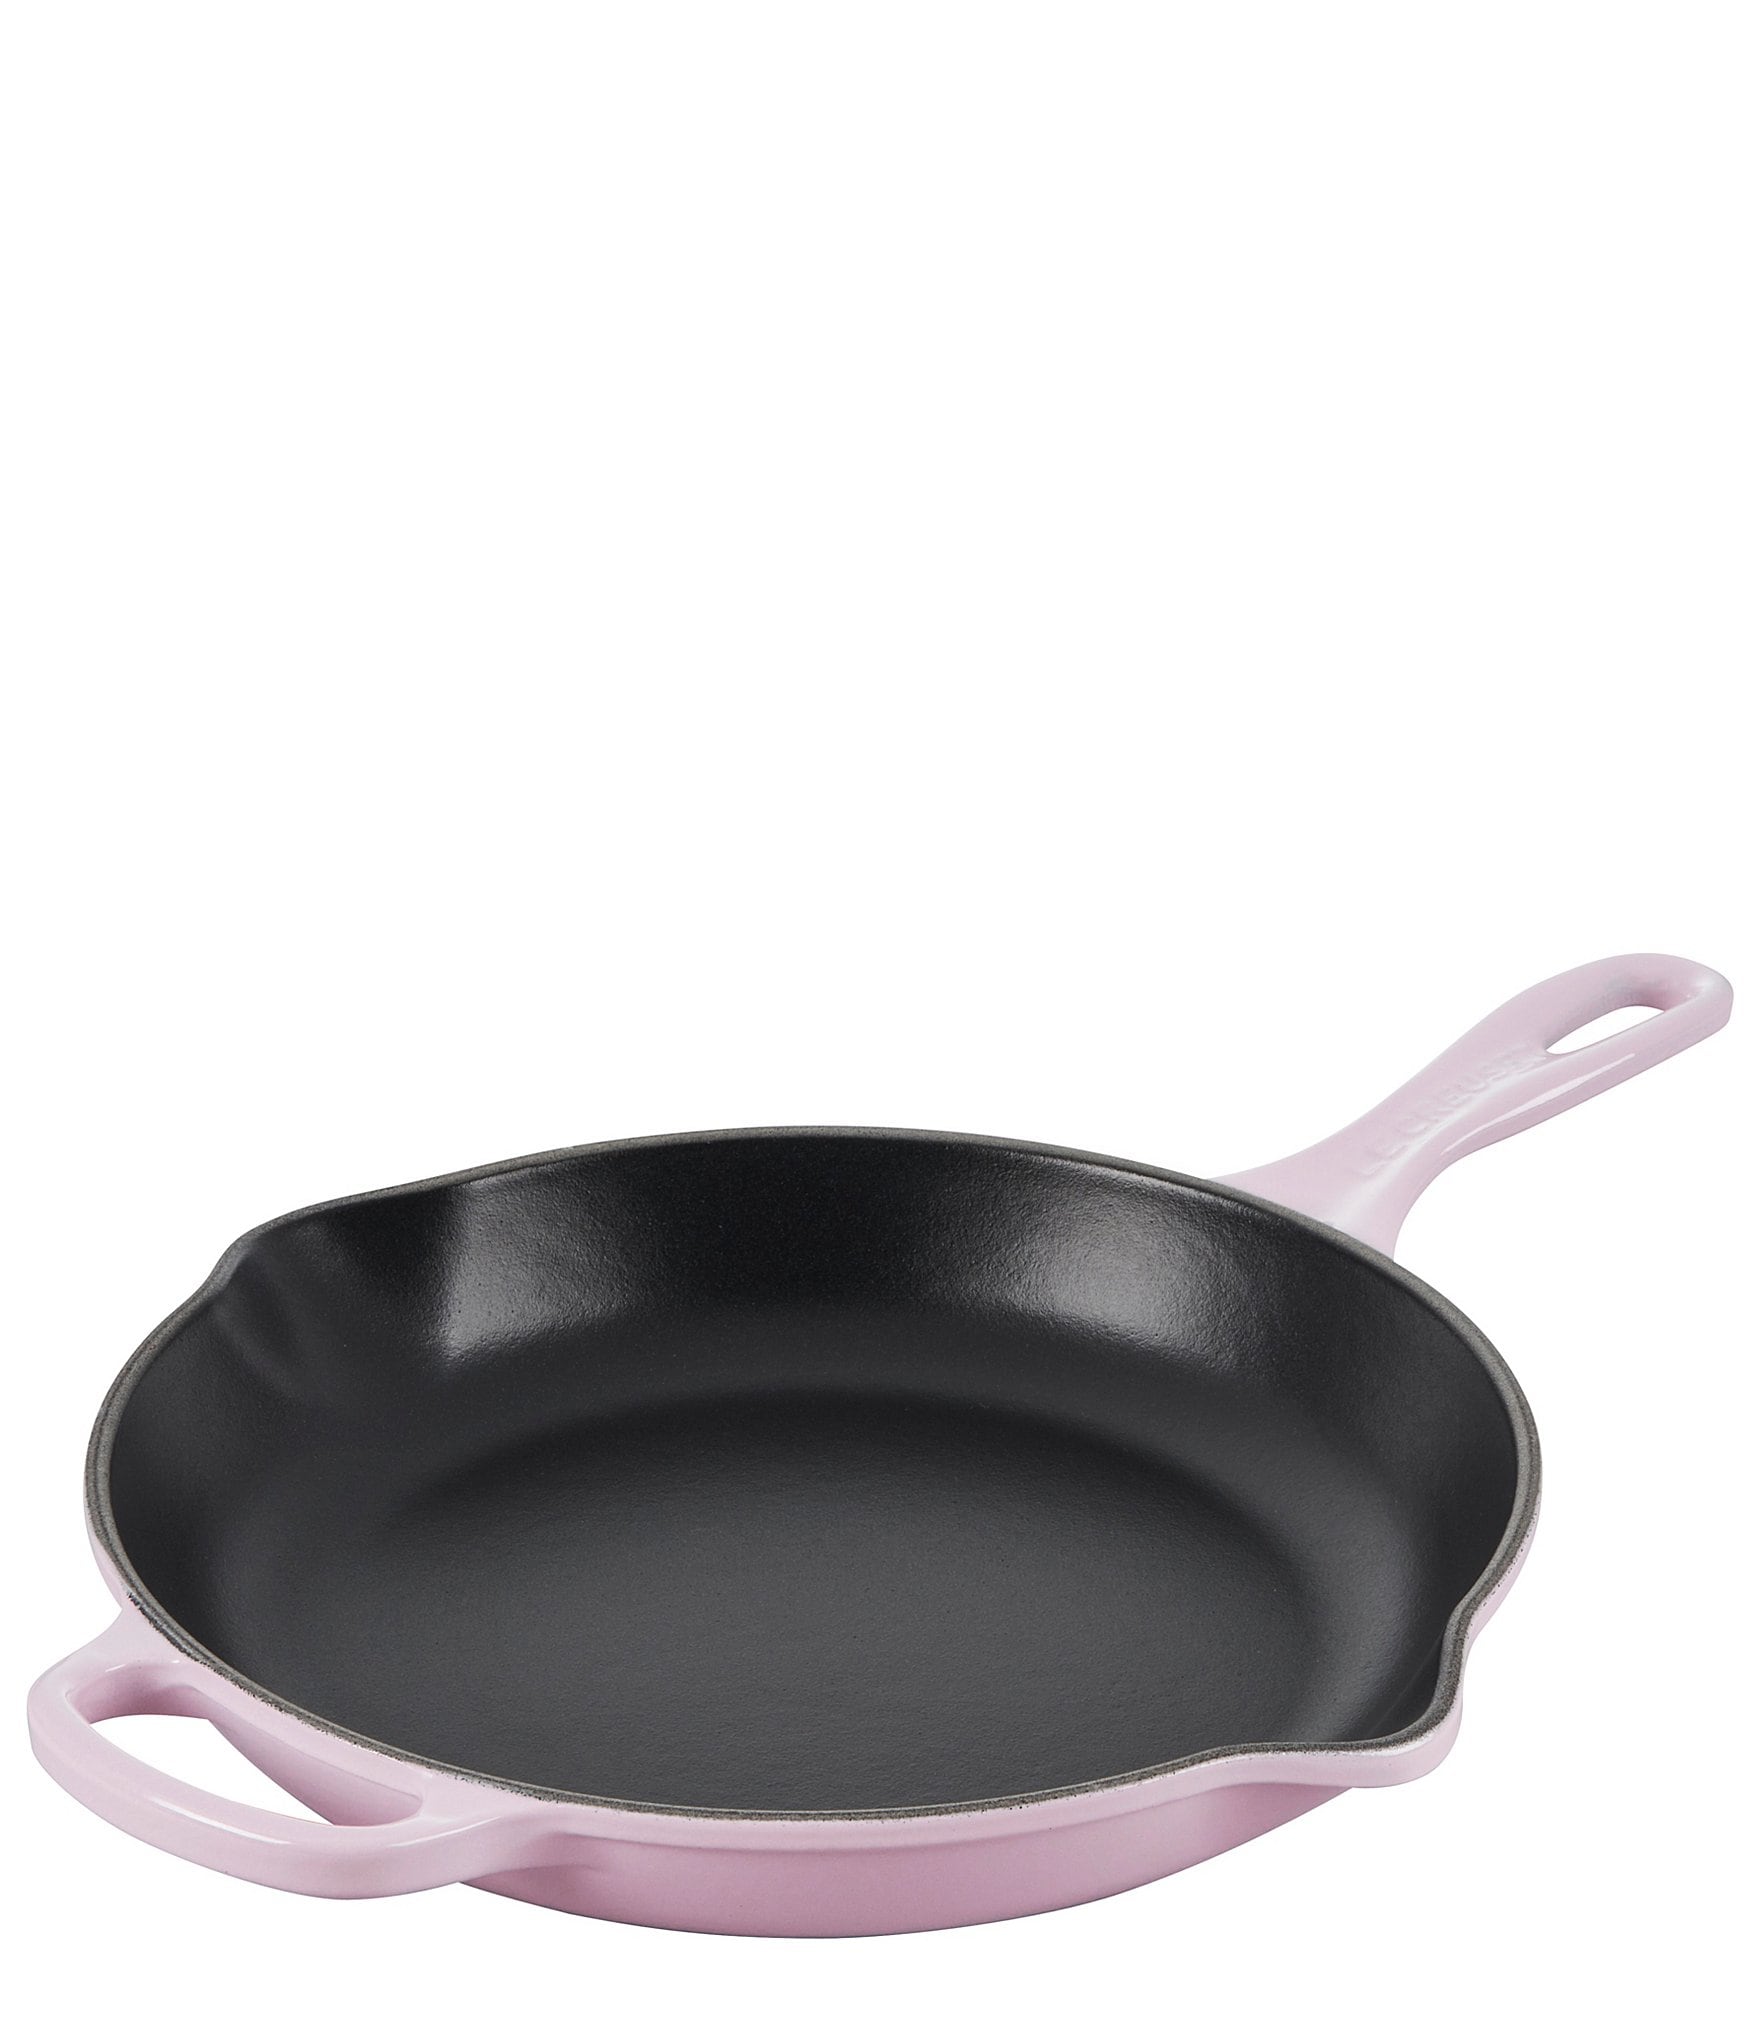 Help! Recently got this Le Creuset skillet, and almost immediately